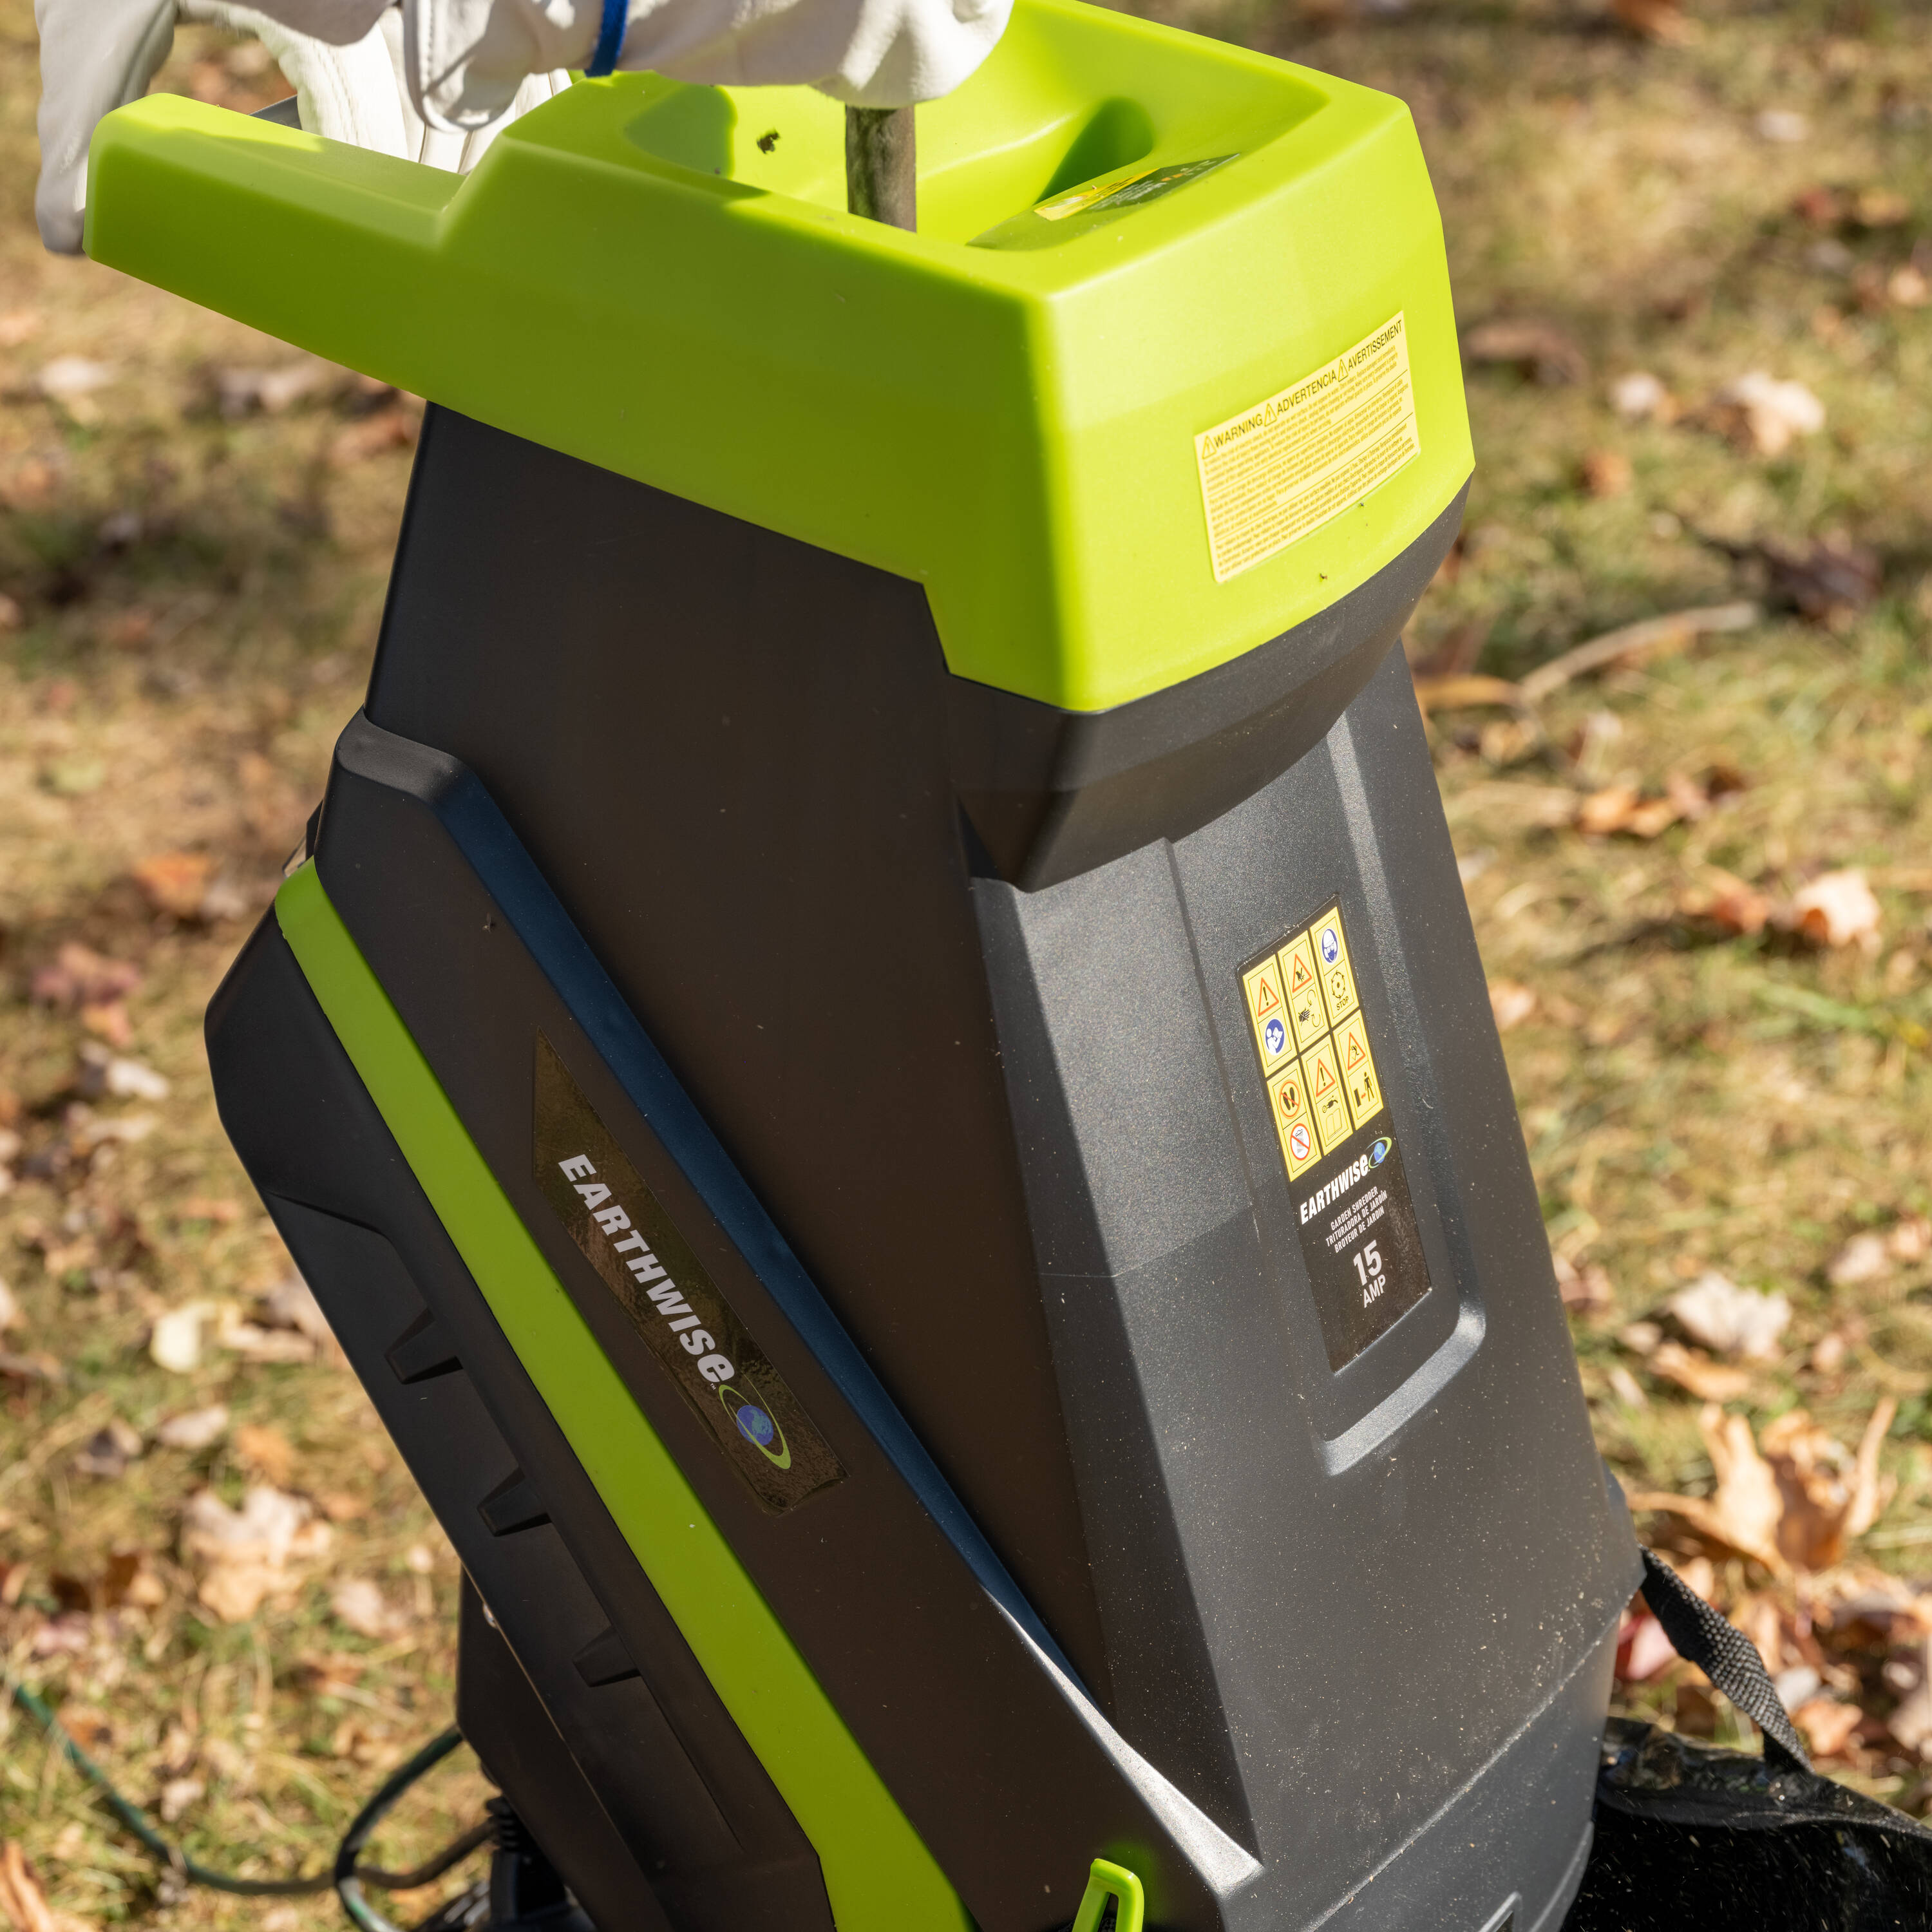 Earthwise Combo Electric Chipper Shredder